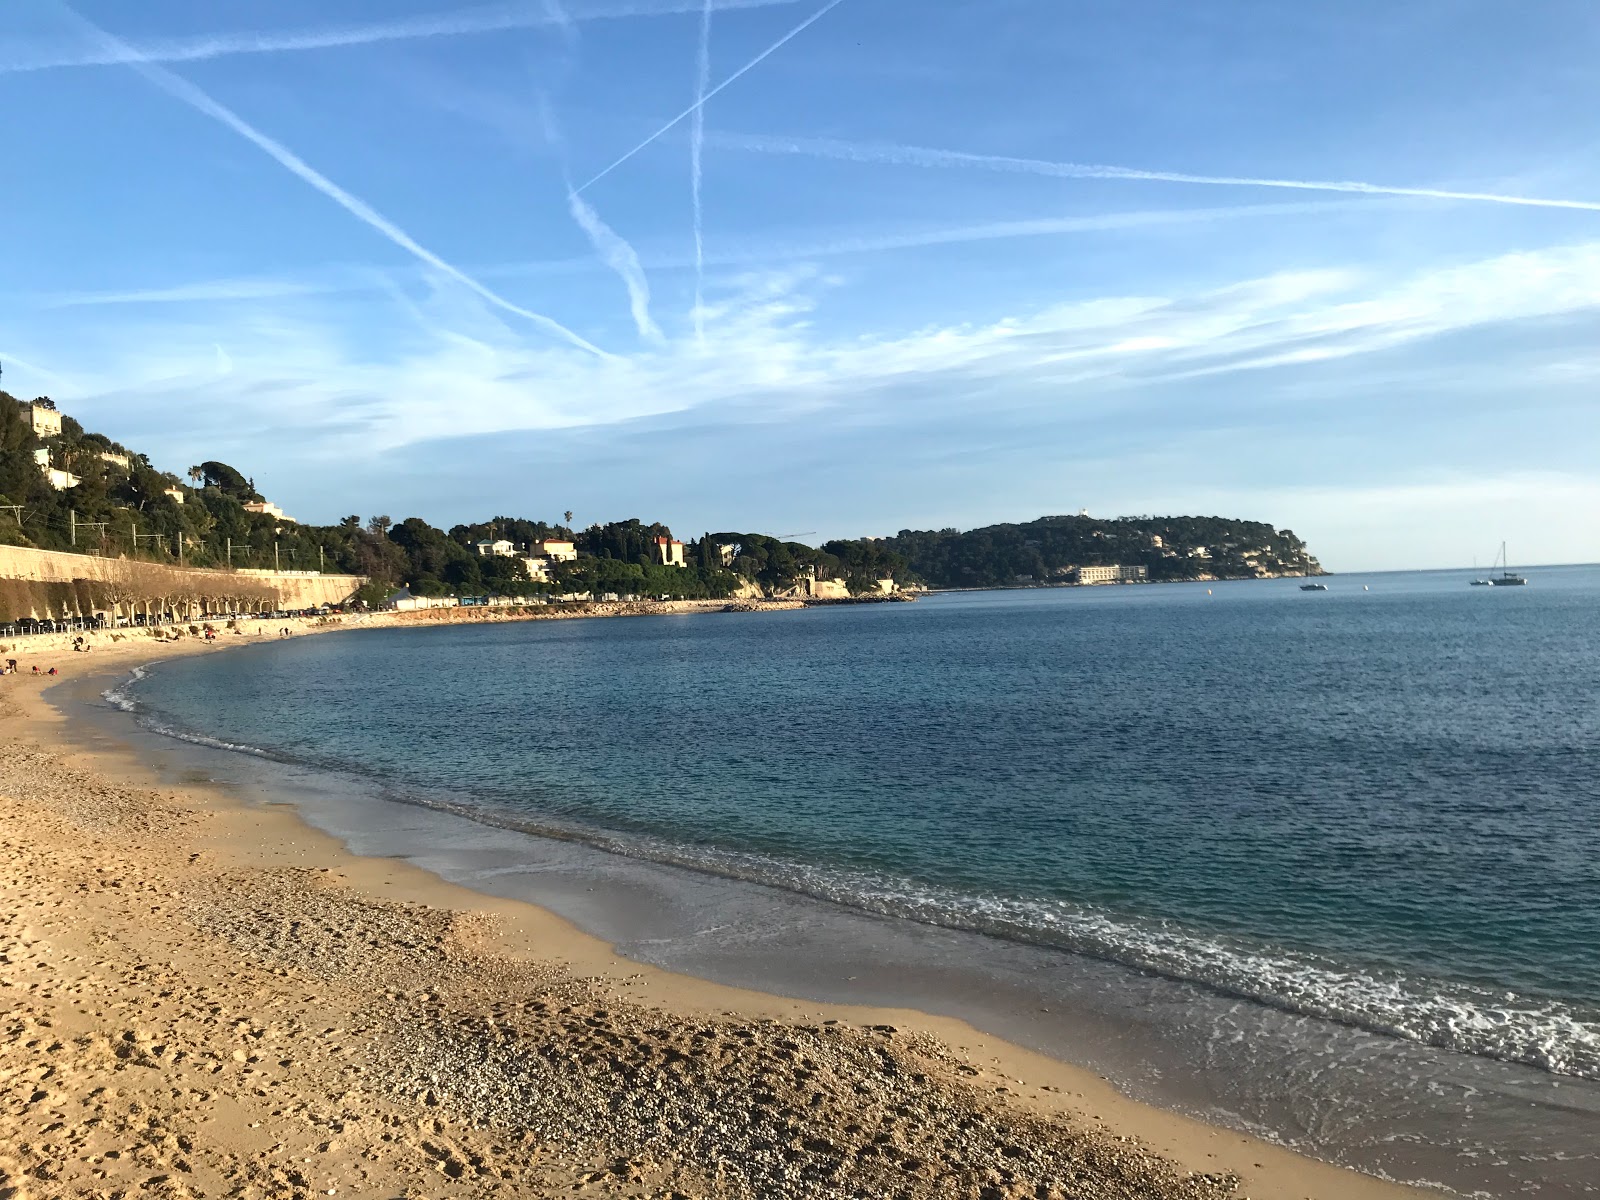 Photo of Villefranche-sur-Mer beach and its beautiful scenery